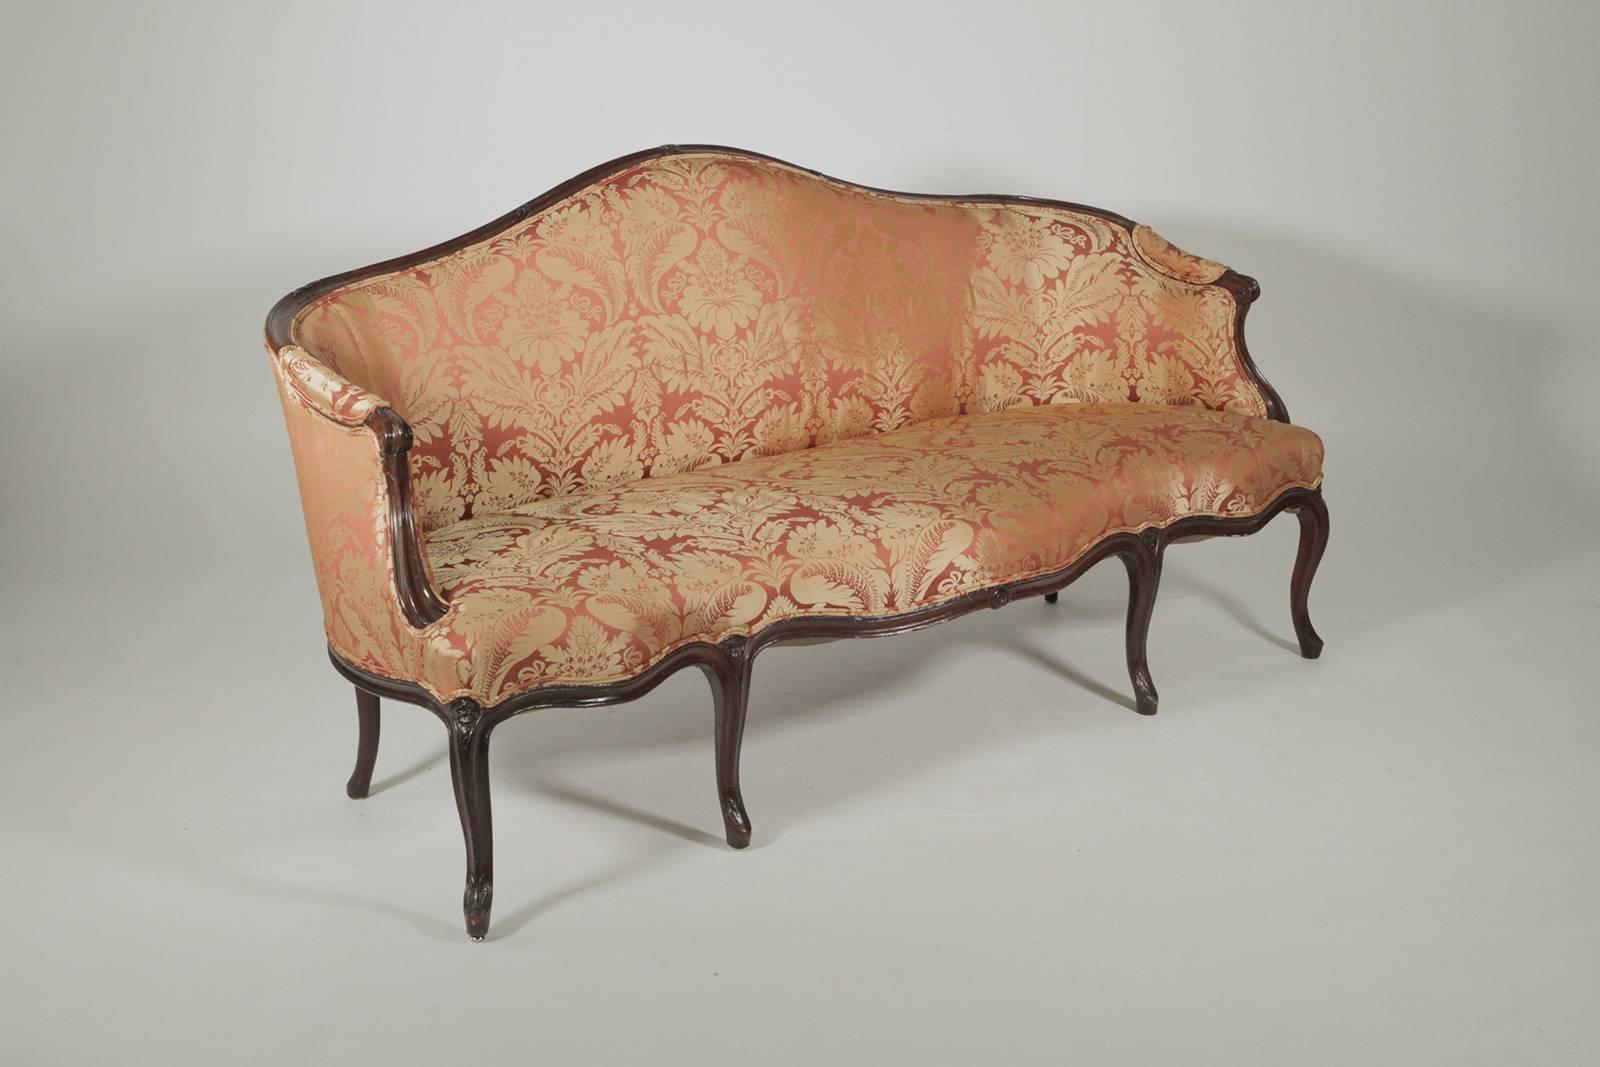 French style walnut serpentine sofa with recent damask upholstery. The graceful hand carved frame with gentle curves with eight hay hand tied springs. Wonderful medium size, and easy to care for attached seat and back.